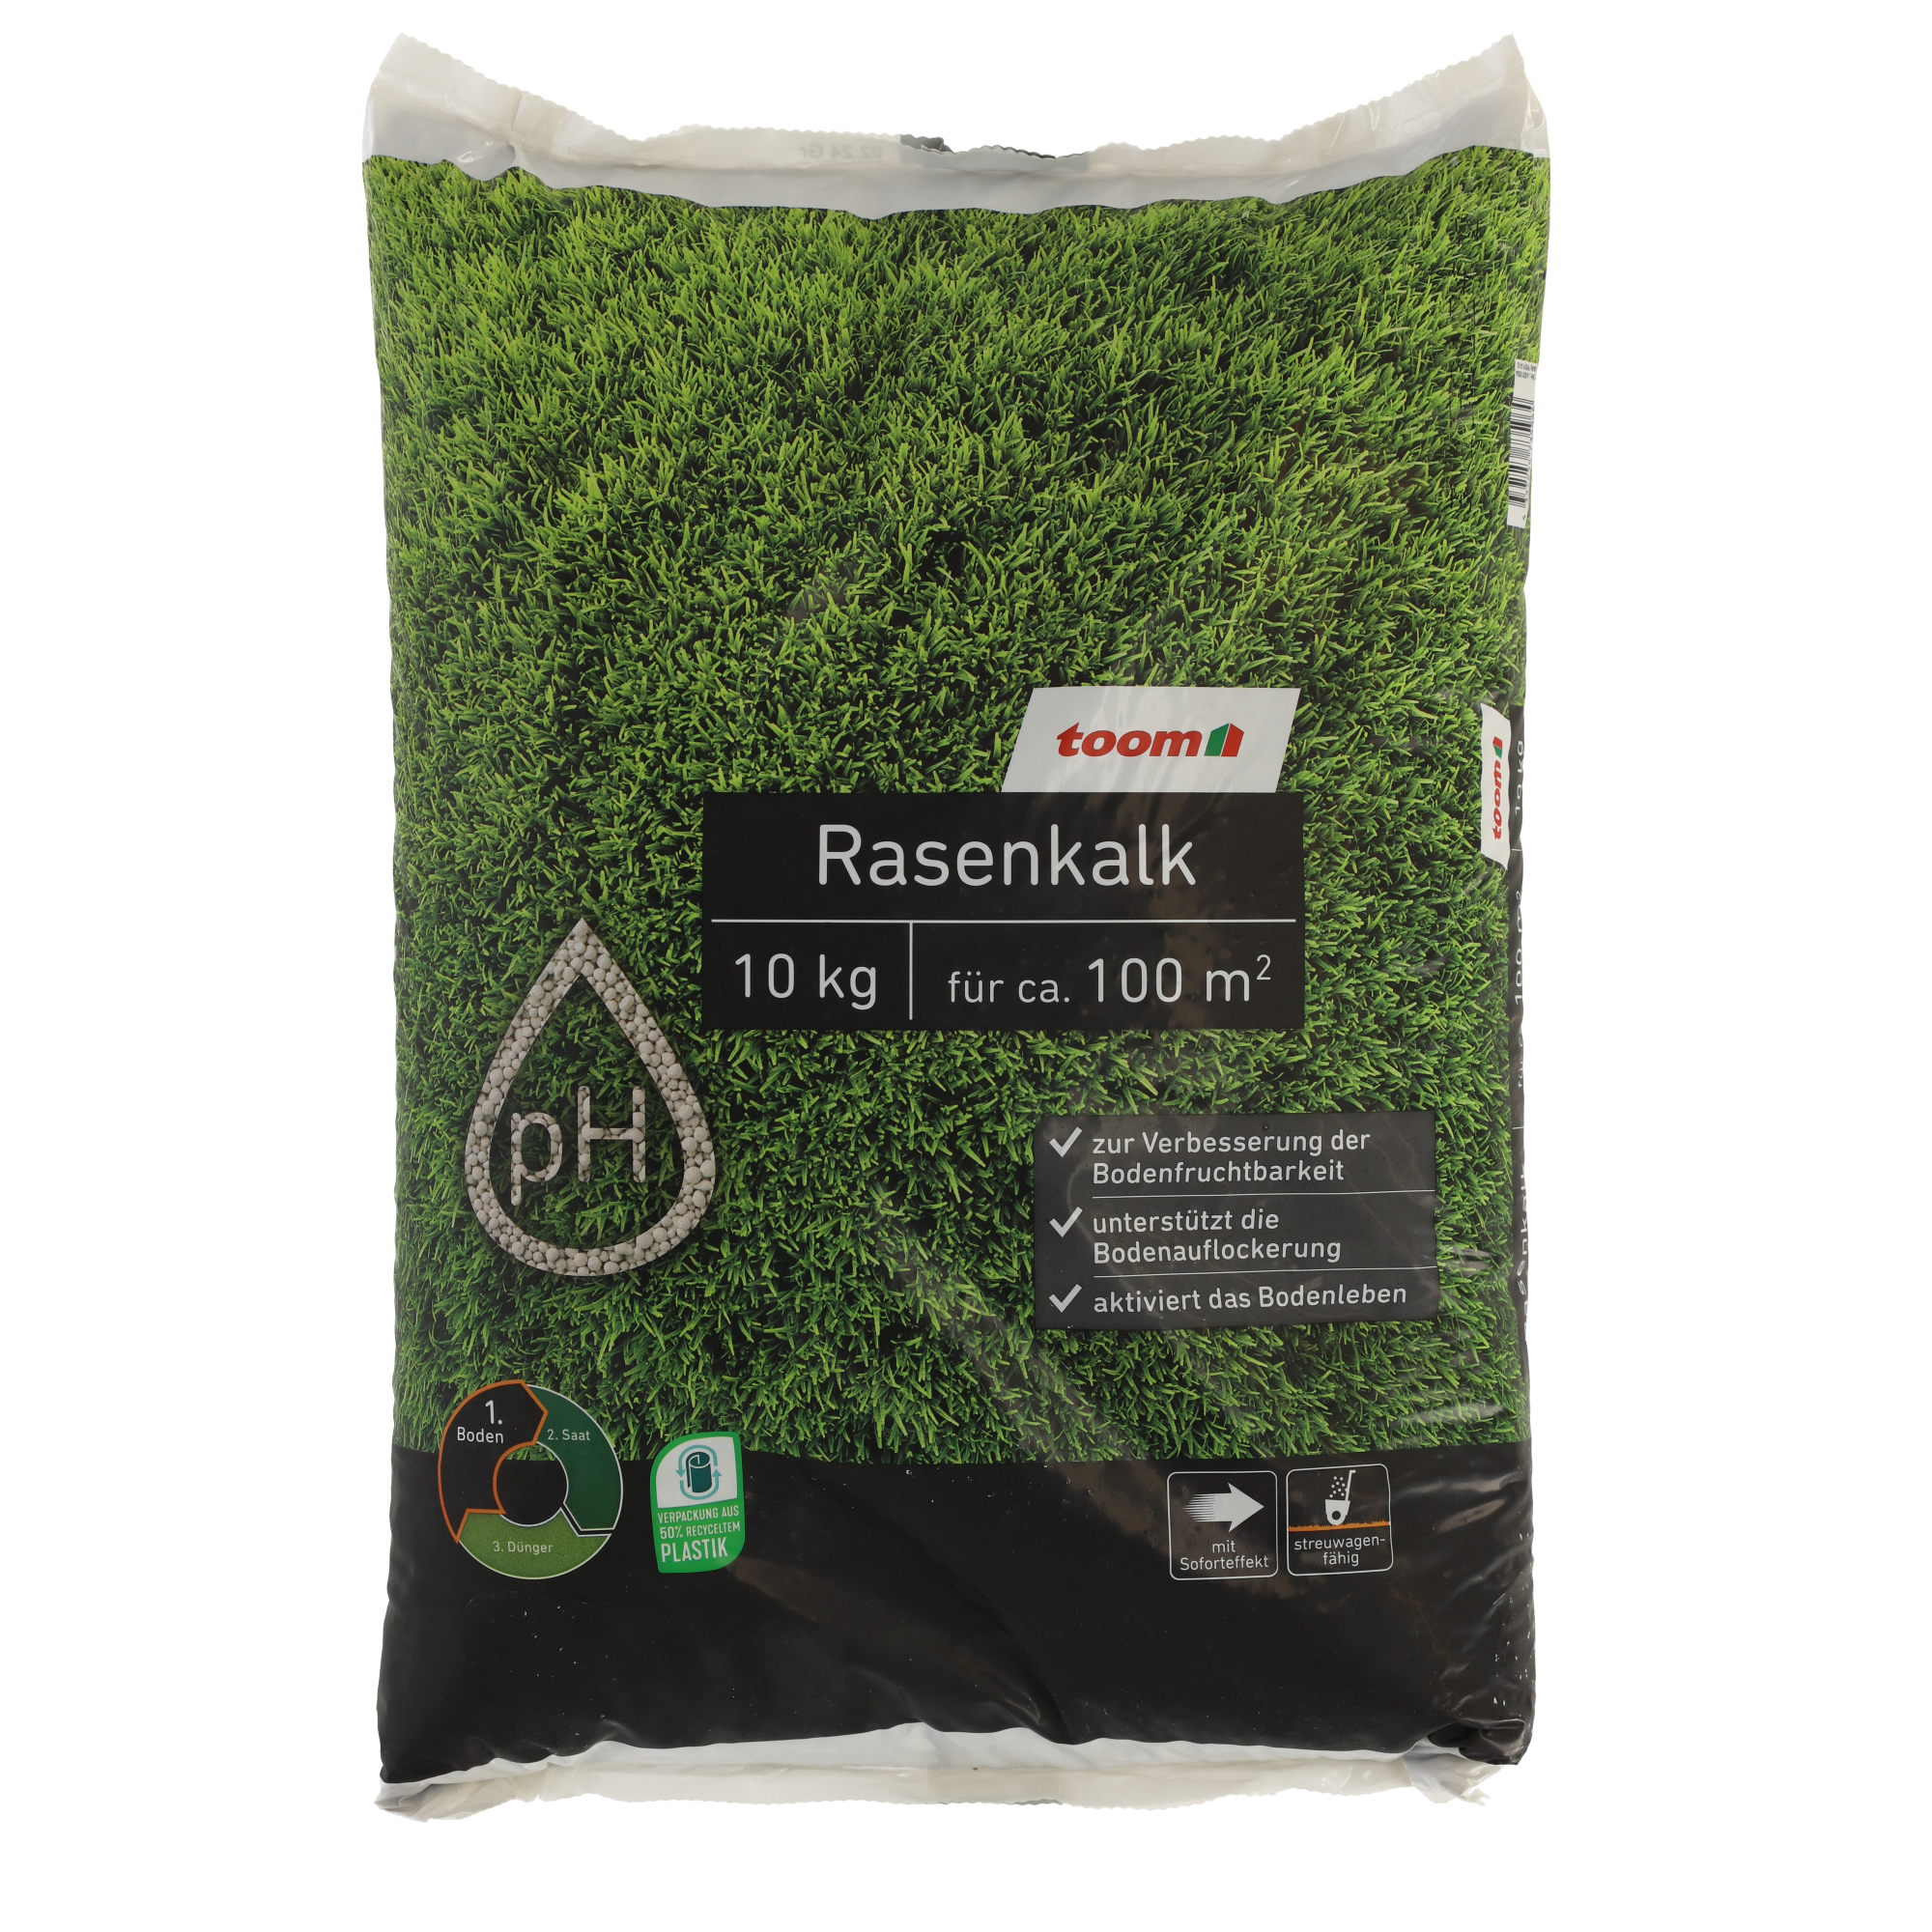 Rasenkalk 10 kg + product picture